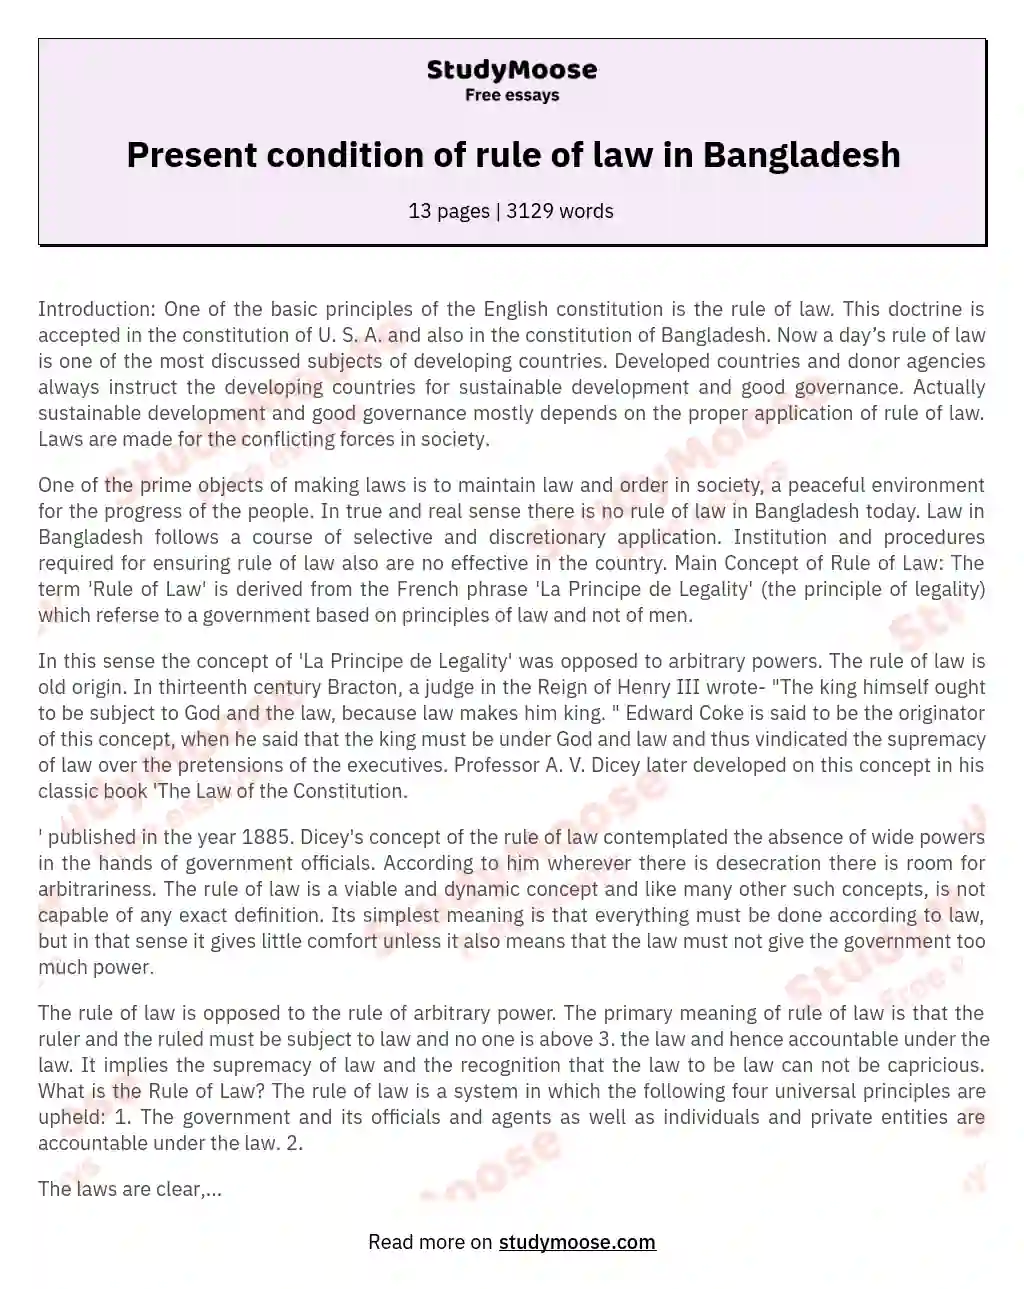 Present condition of rule of law in Bangladesh essay